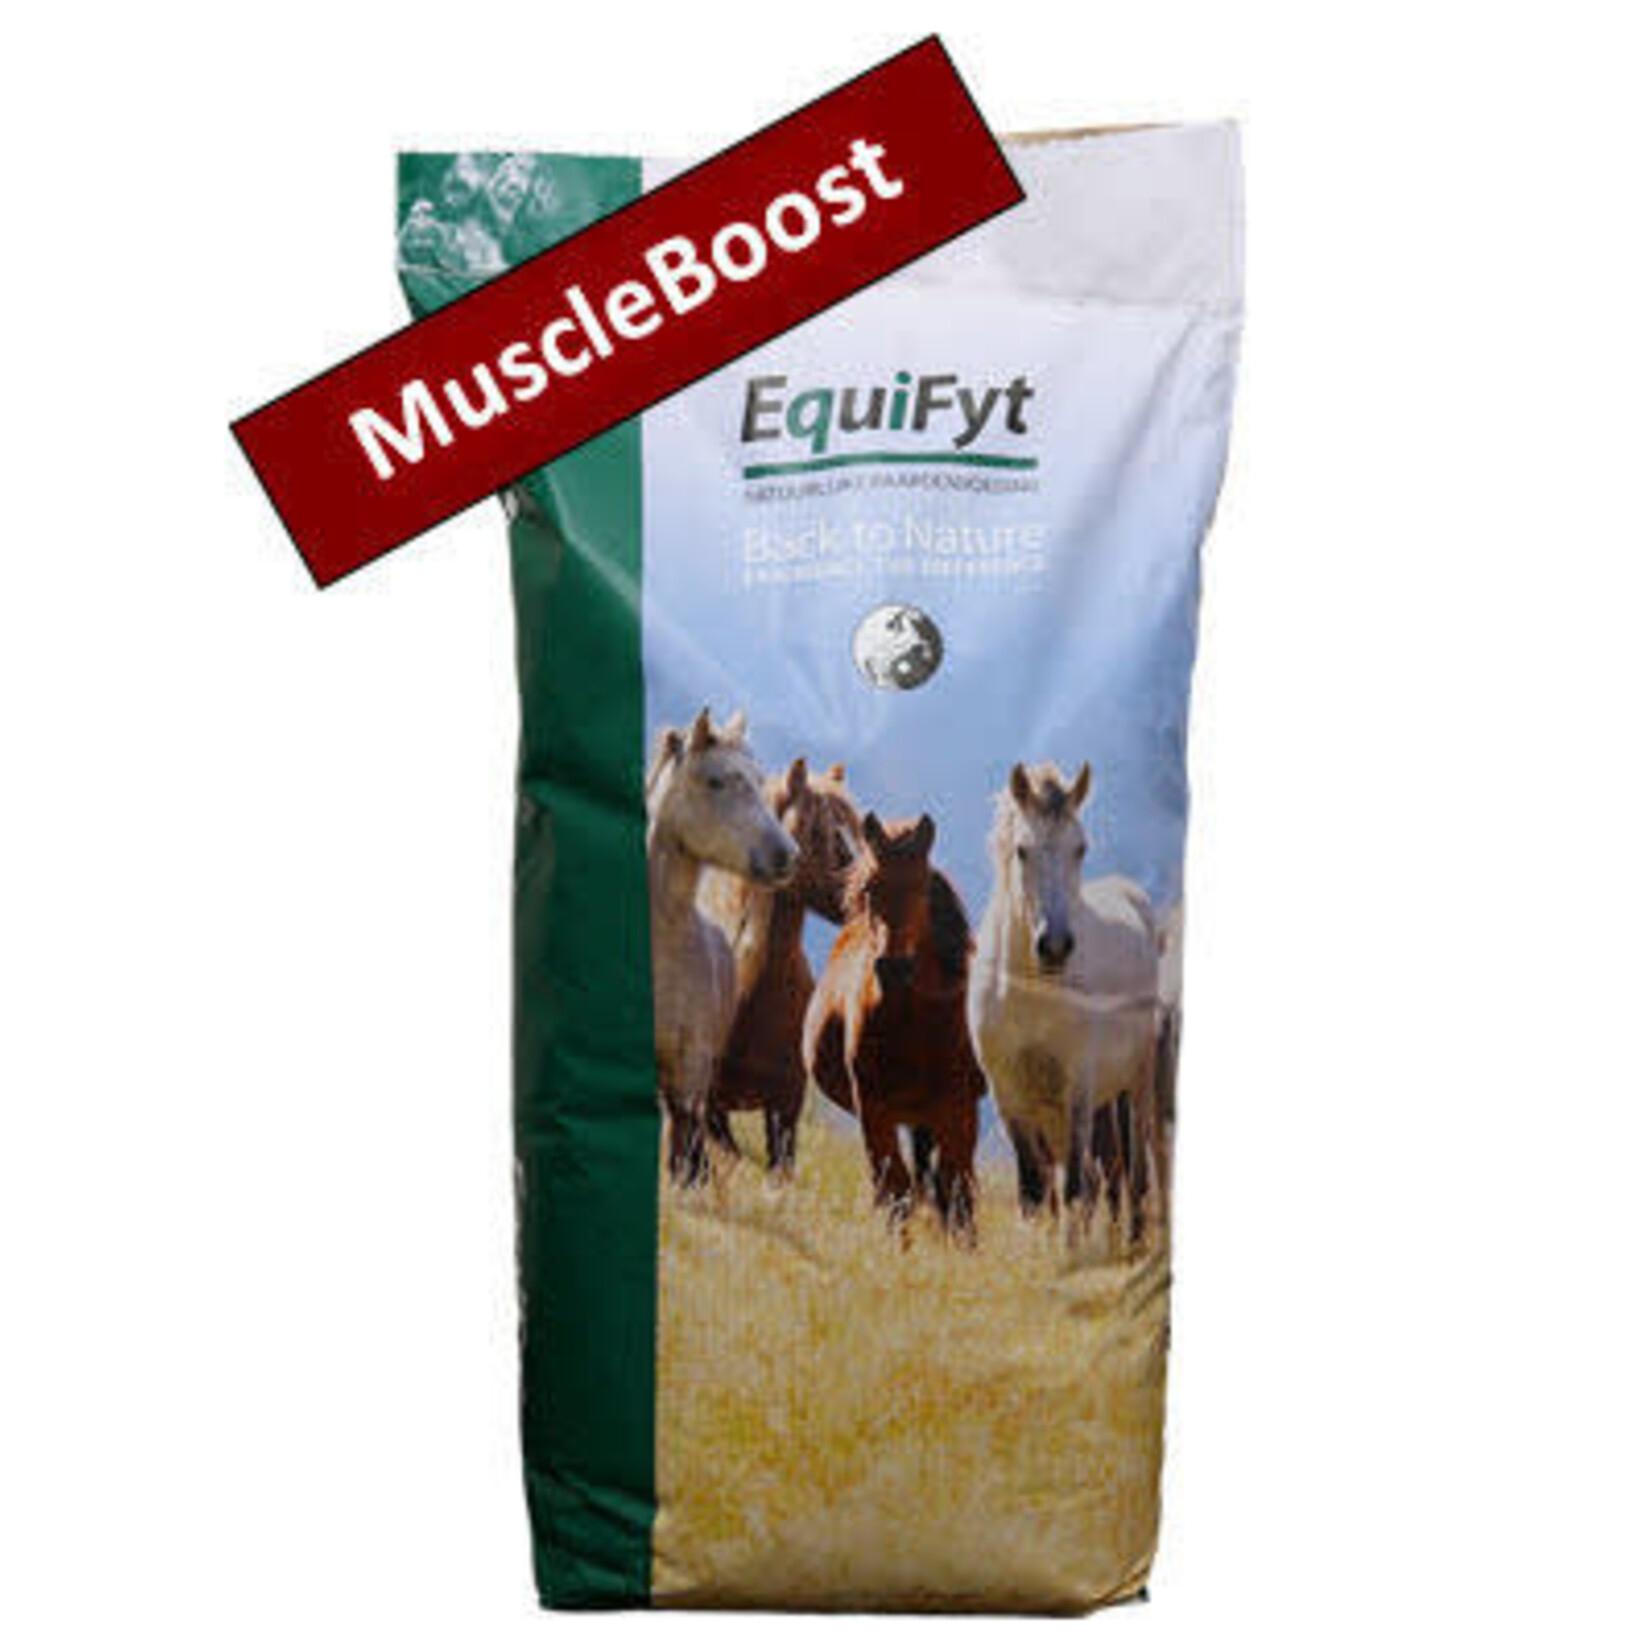 Equifyt Equifyt Muscle Boost 20 KG